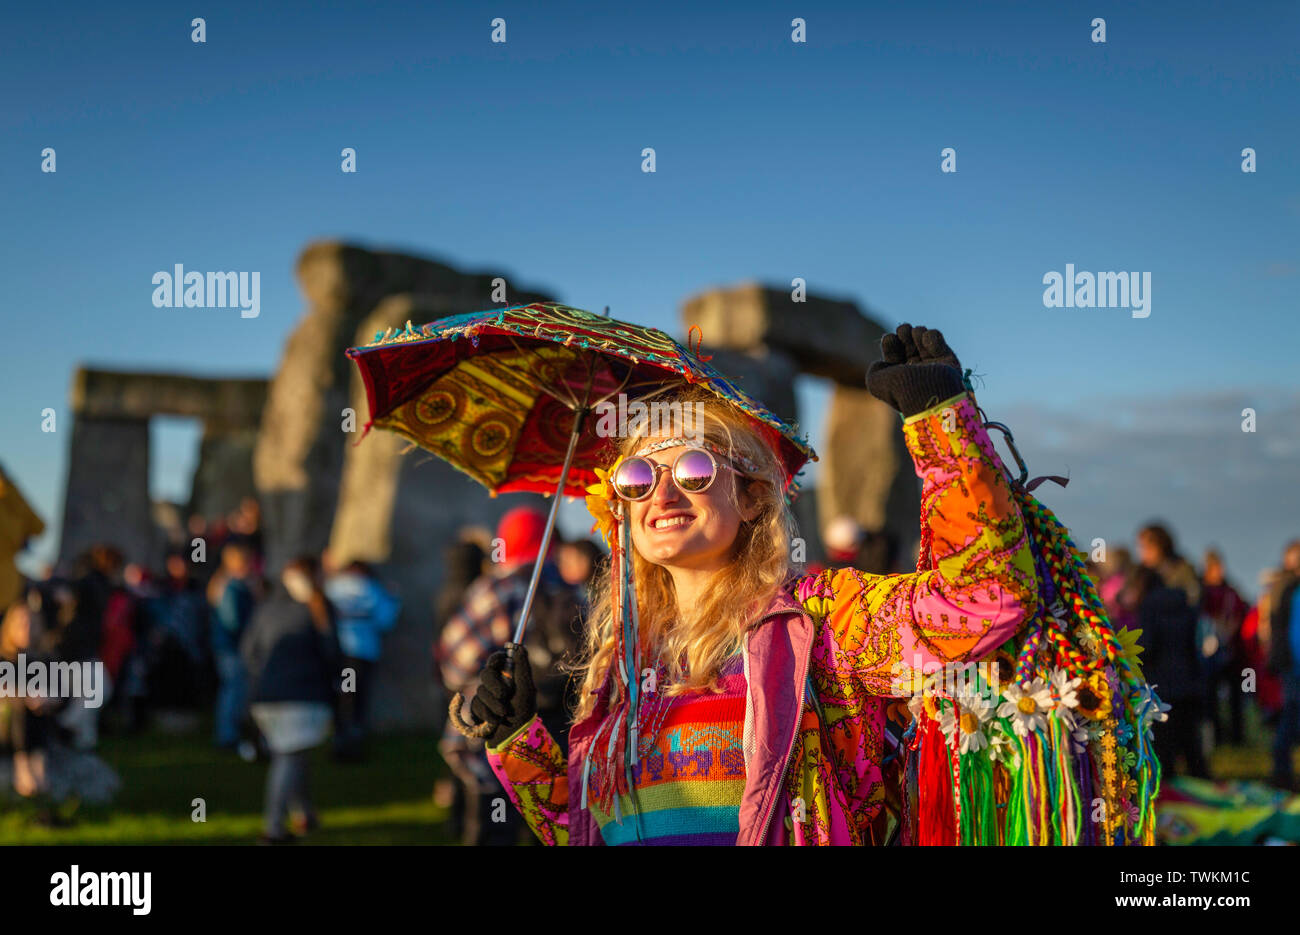 Penny Lane from Atlanta, Georgia, USA enjoys the atmosphere at Stonehenge in Wiltshire during the summer solstice. Picture date Friday 21st June, 2019 Stock Photo